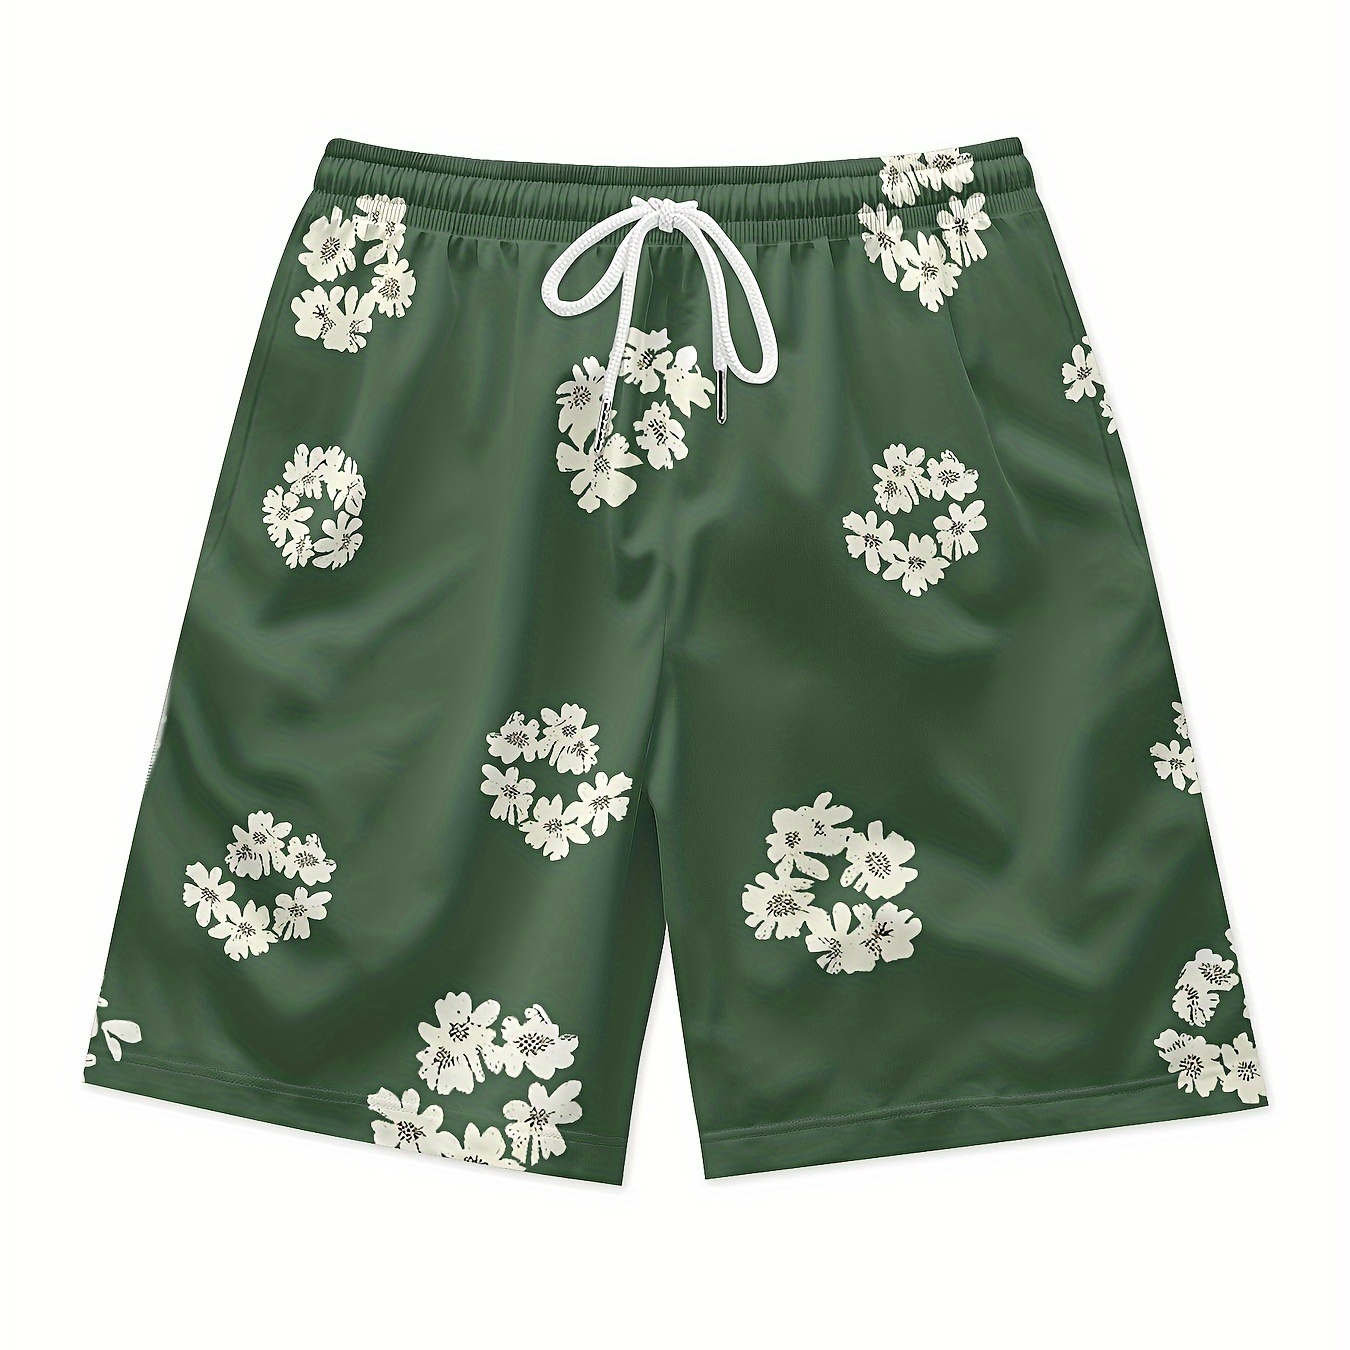 

Floral Print Men's Green Waist Shorts Quick Dry Breathable Polyester Shorts Daily Streetwear Vacation Shorts Clothing Bottoms